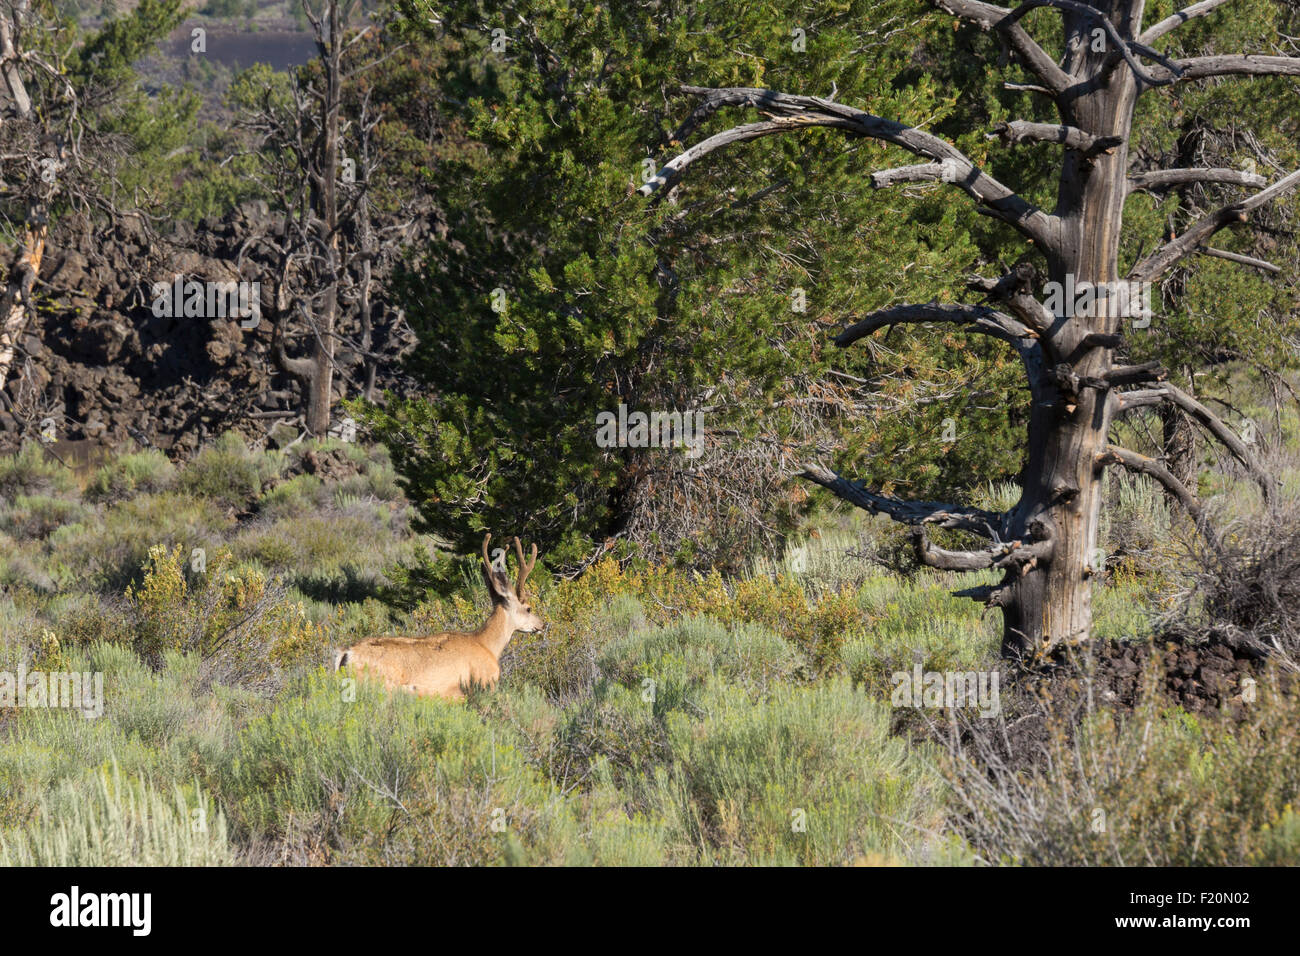 Arco, Idaho - Mule deer in Craters of the Moon National Monument. Stock Photo